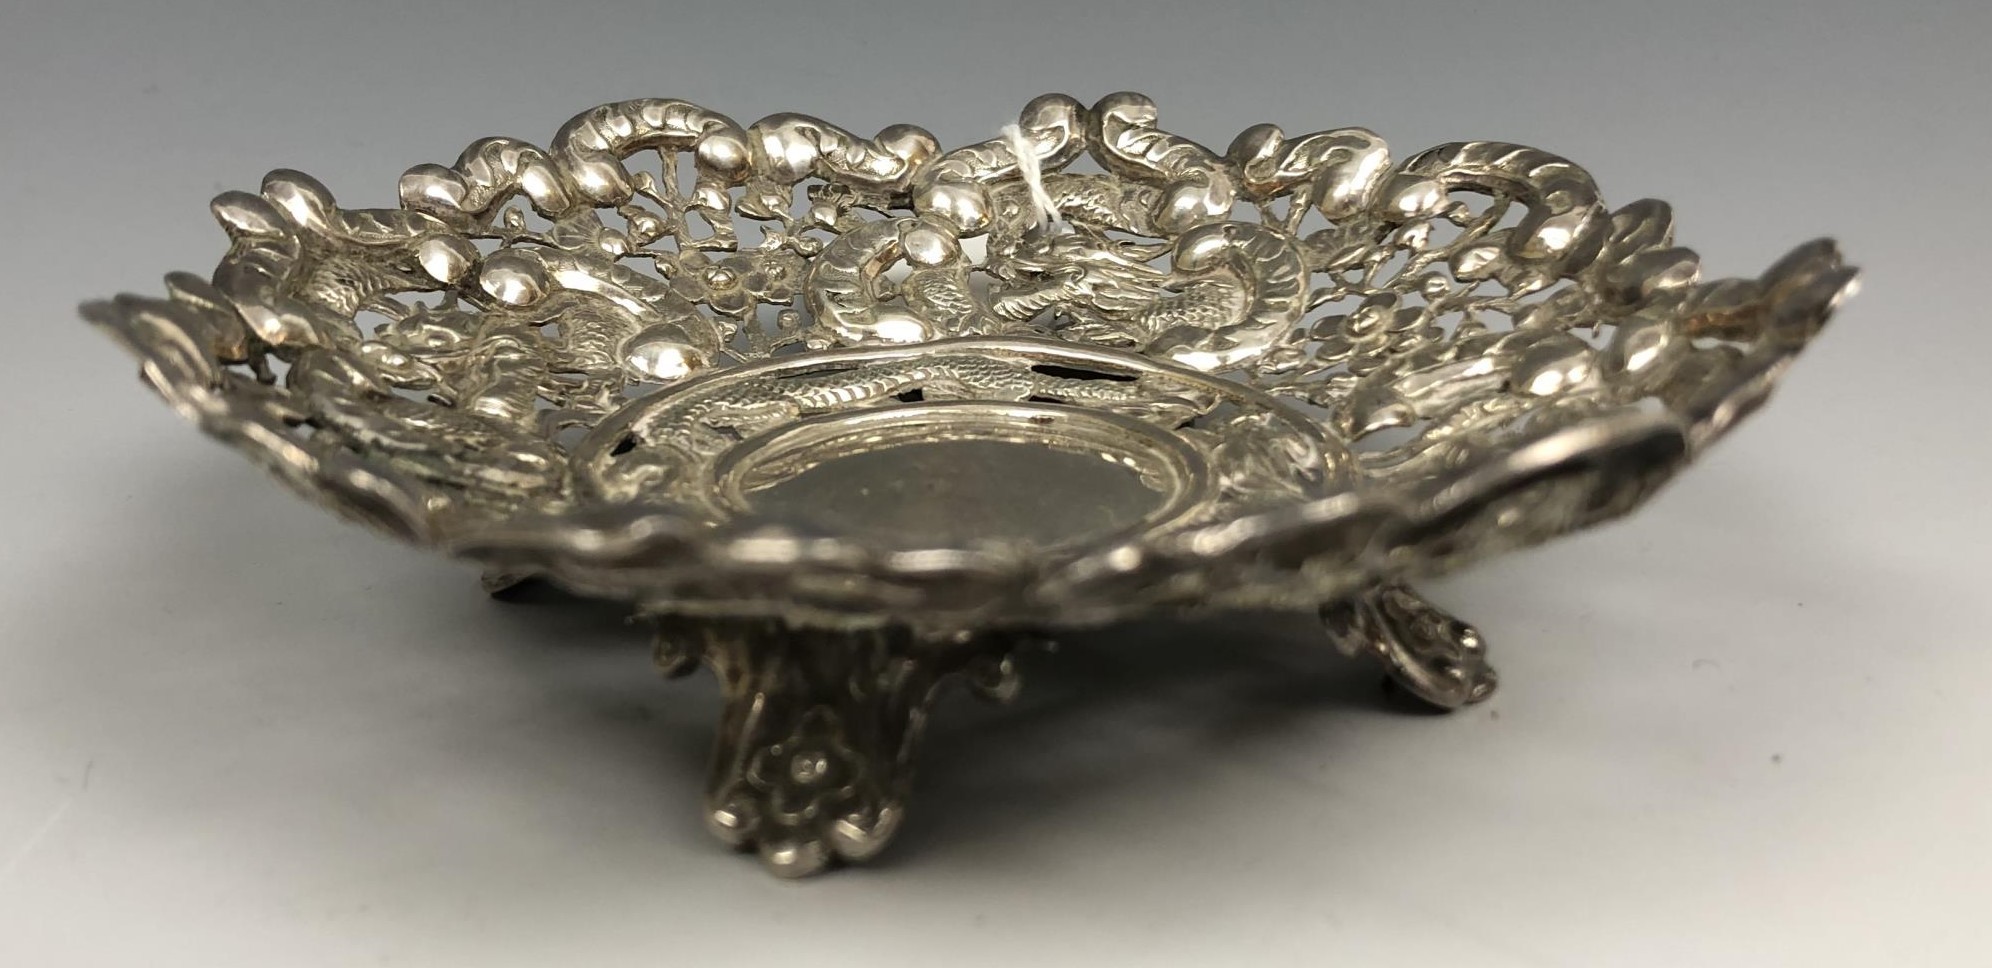 A Chinese silver coloured metal dish, embossed dragons and foliage, 12 cm diameter 2.3 ozt